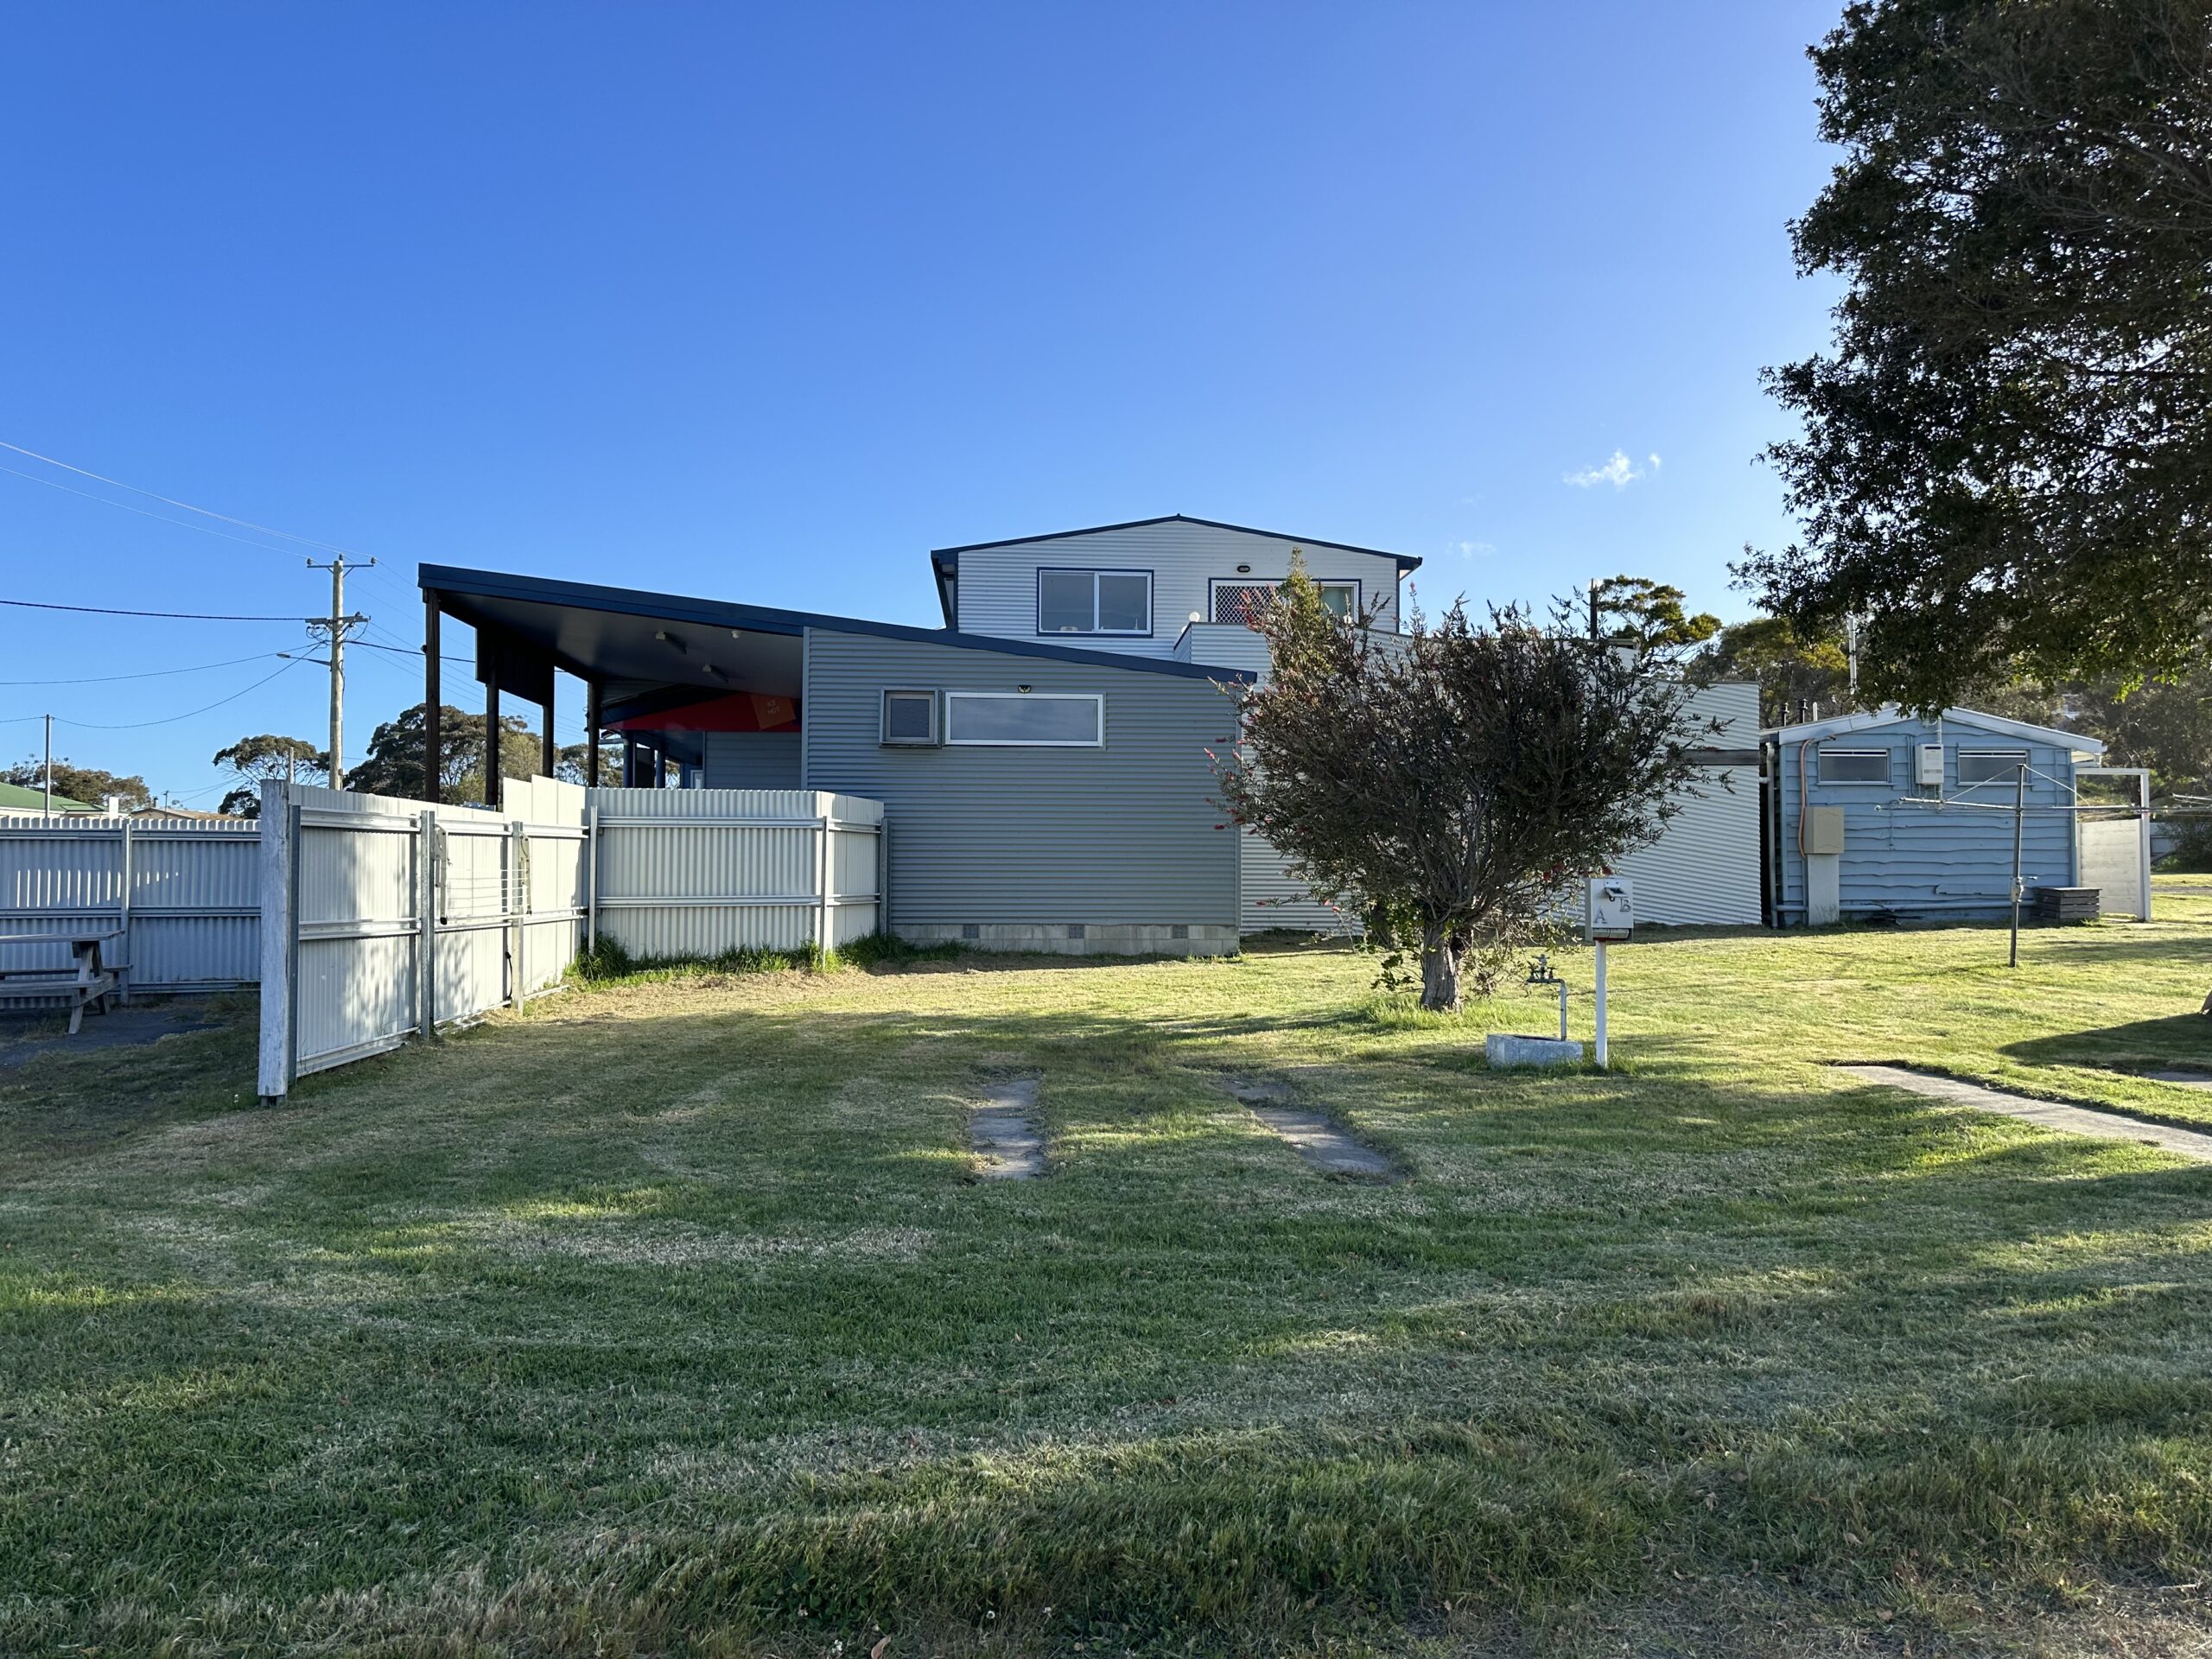 Explore the bicheno caravan park and get all the details about it